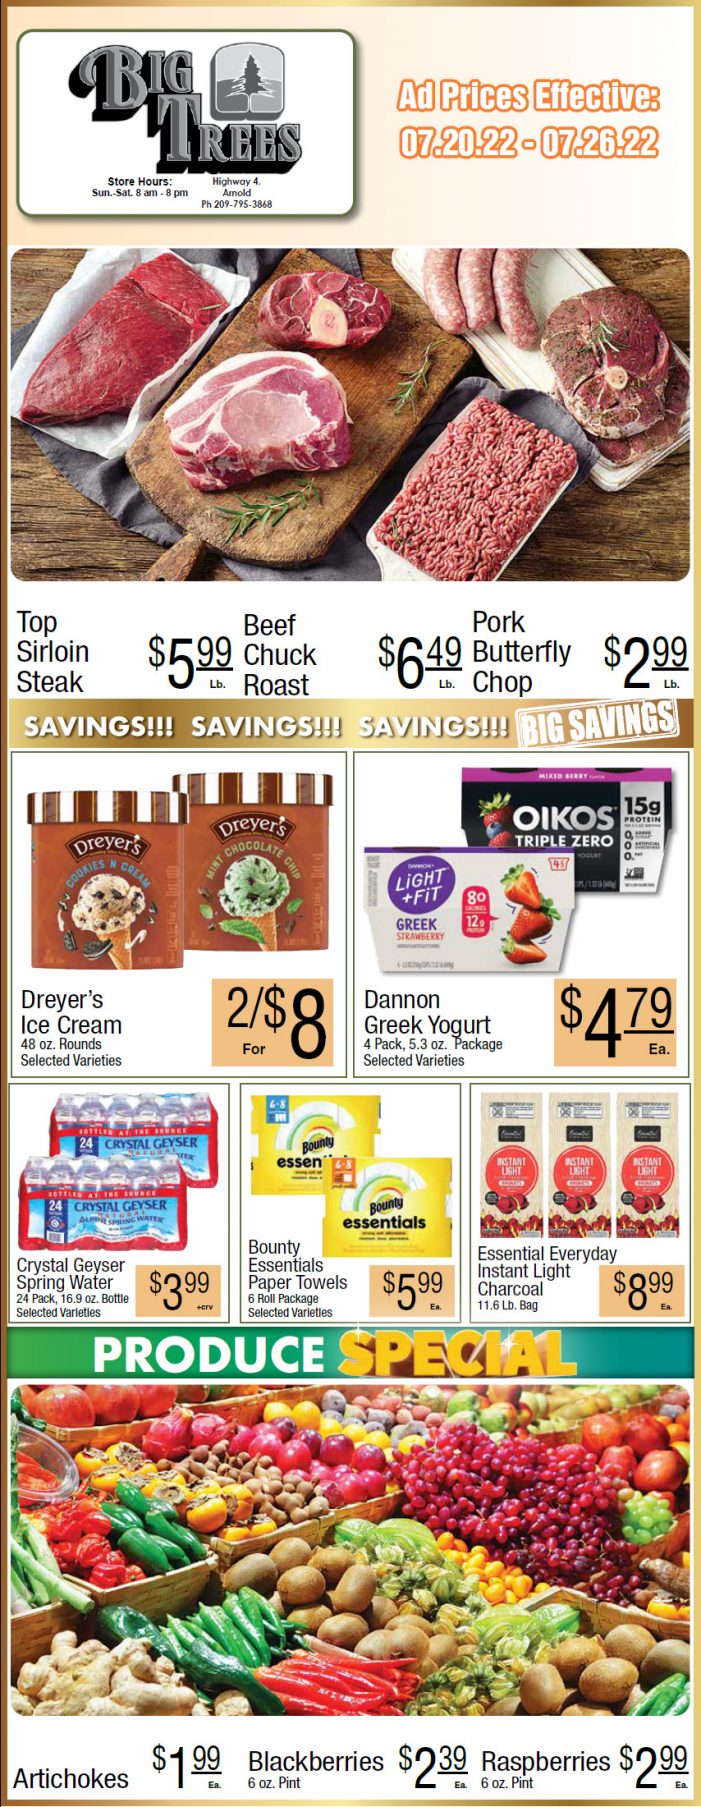 Big Trees Market Weekly Ad & Grocery Specials July 20 – 26!  Shop Local & Save for Summer!!